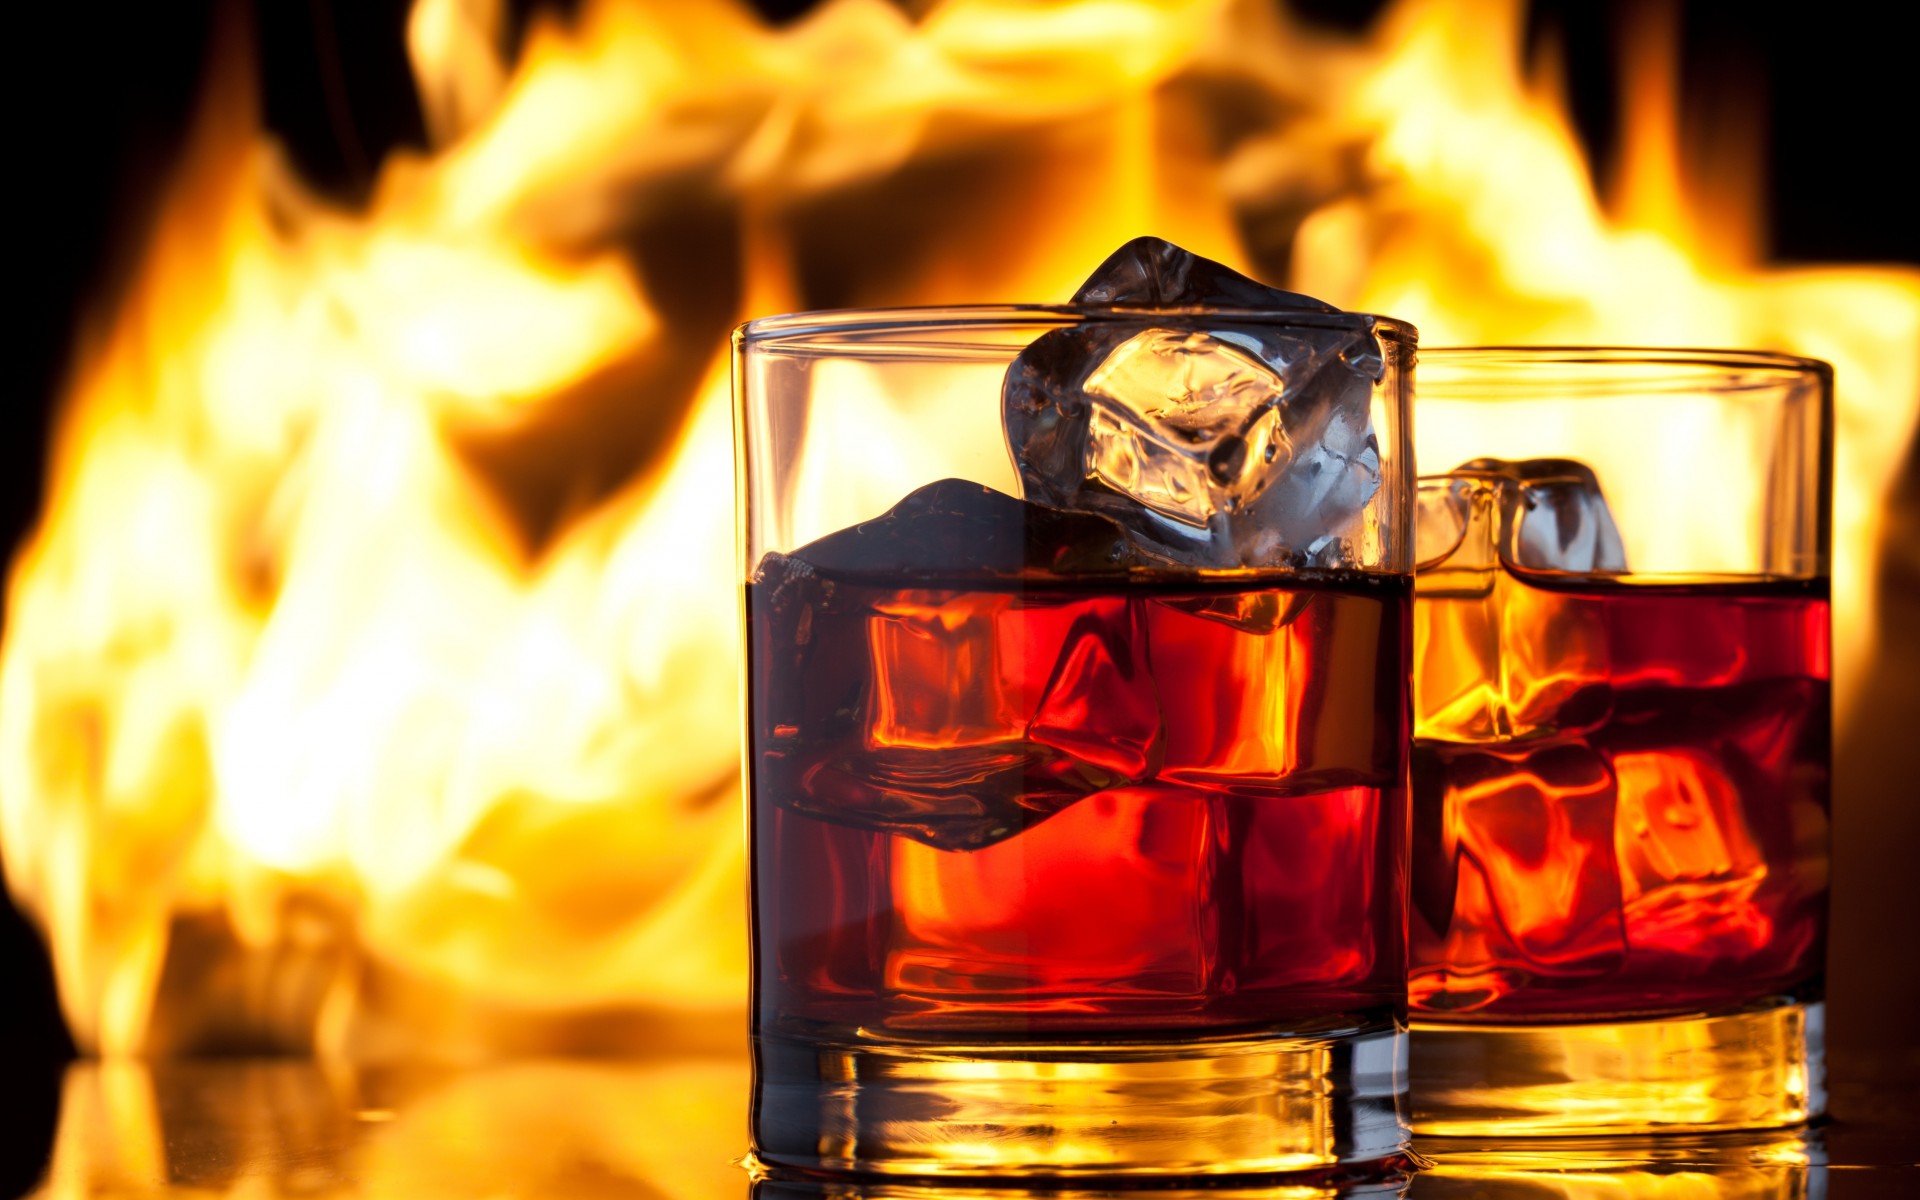 Whiskey Drink Ice Glasses Fire Flame Alchohol Wallpaper Background